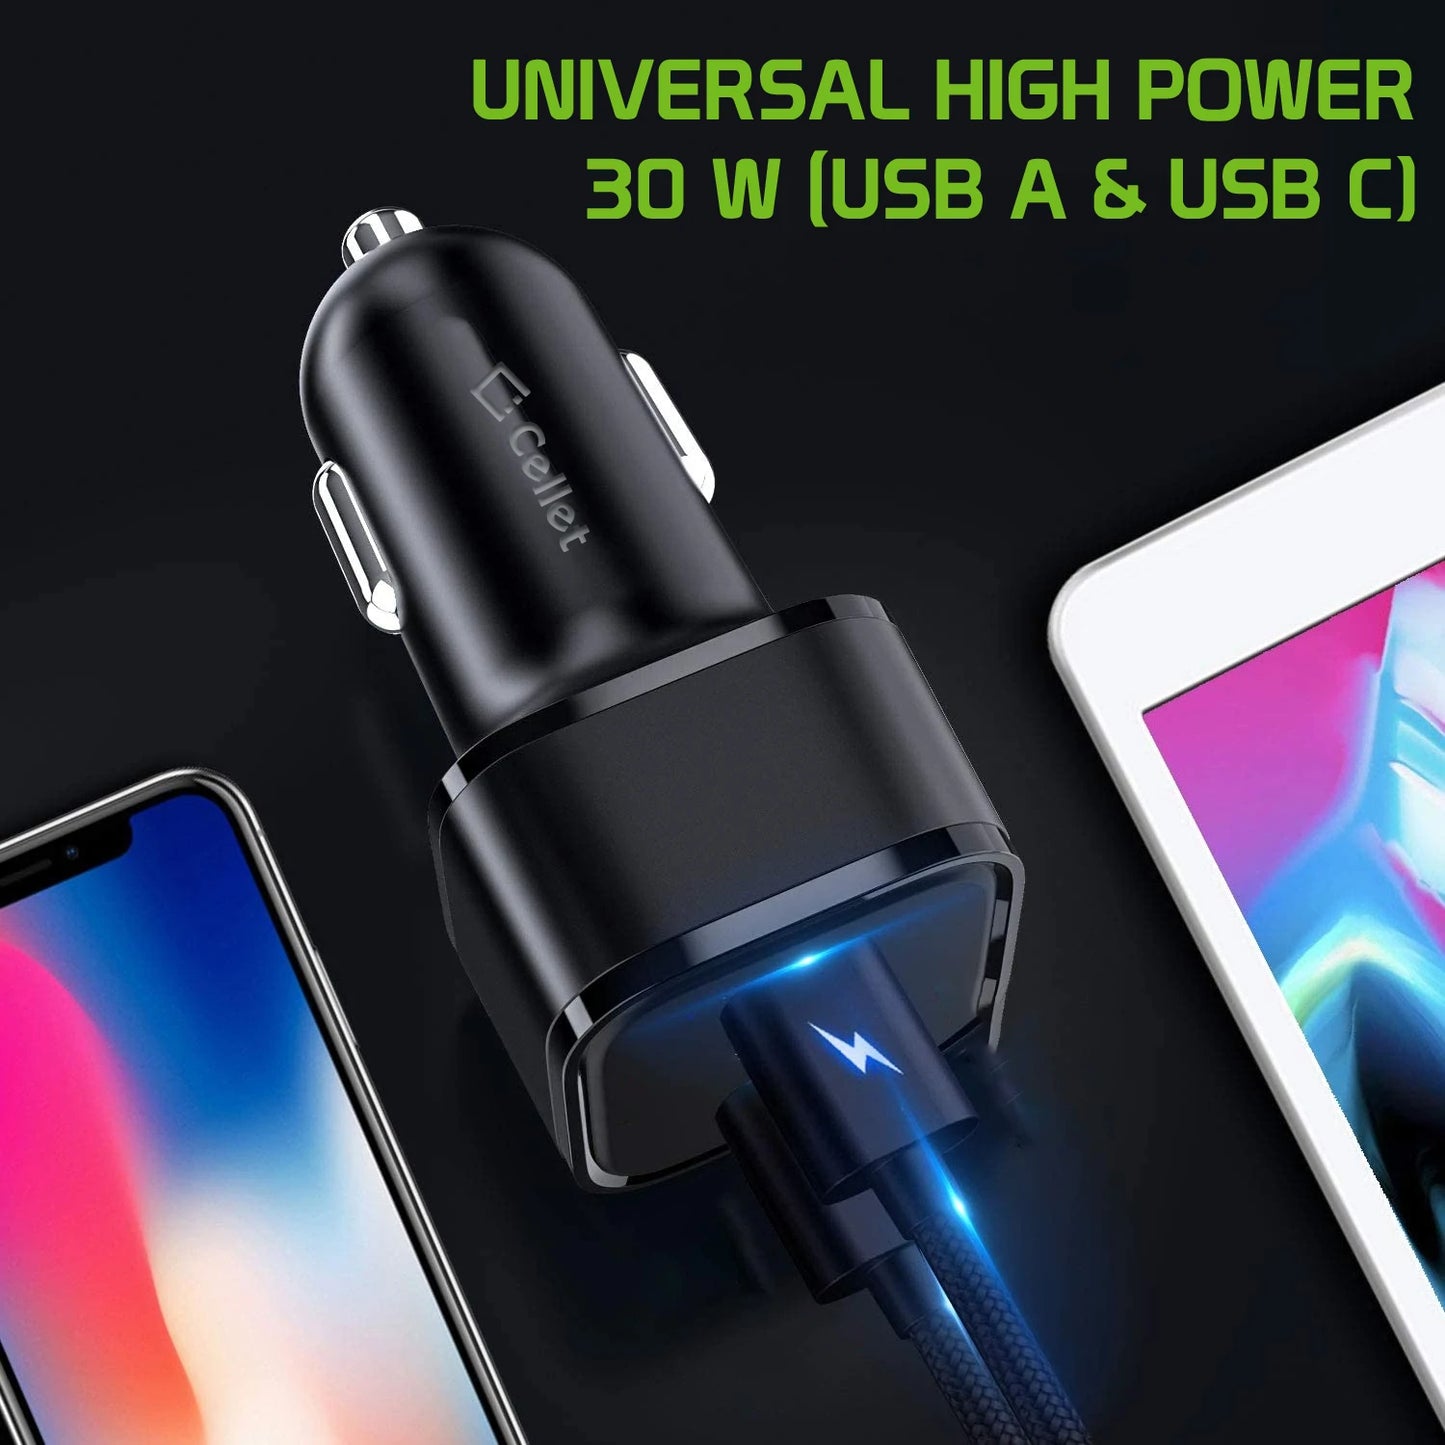 PC30WCBK - Universal High Power 30 Watt Dual (USB A & USB C) Port Car Charger with Type C Cable Included for Phone 13 Pro, 13 Pro Max